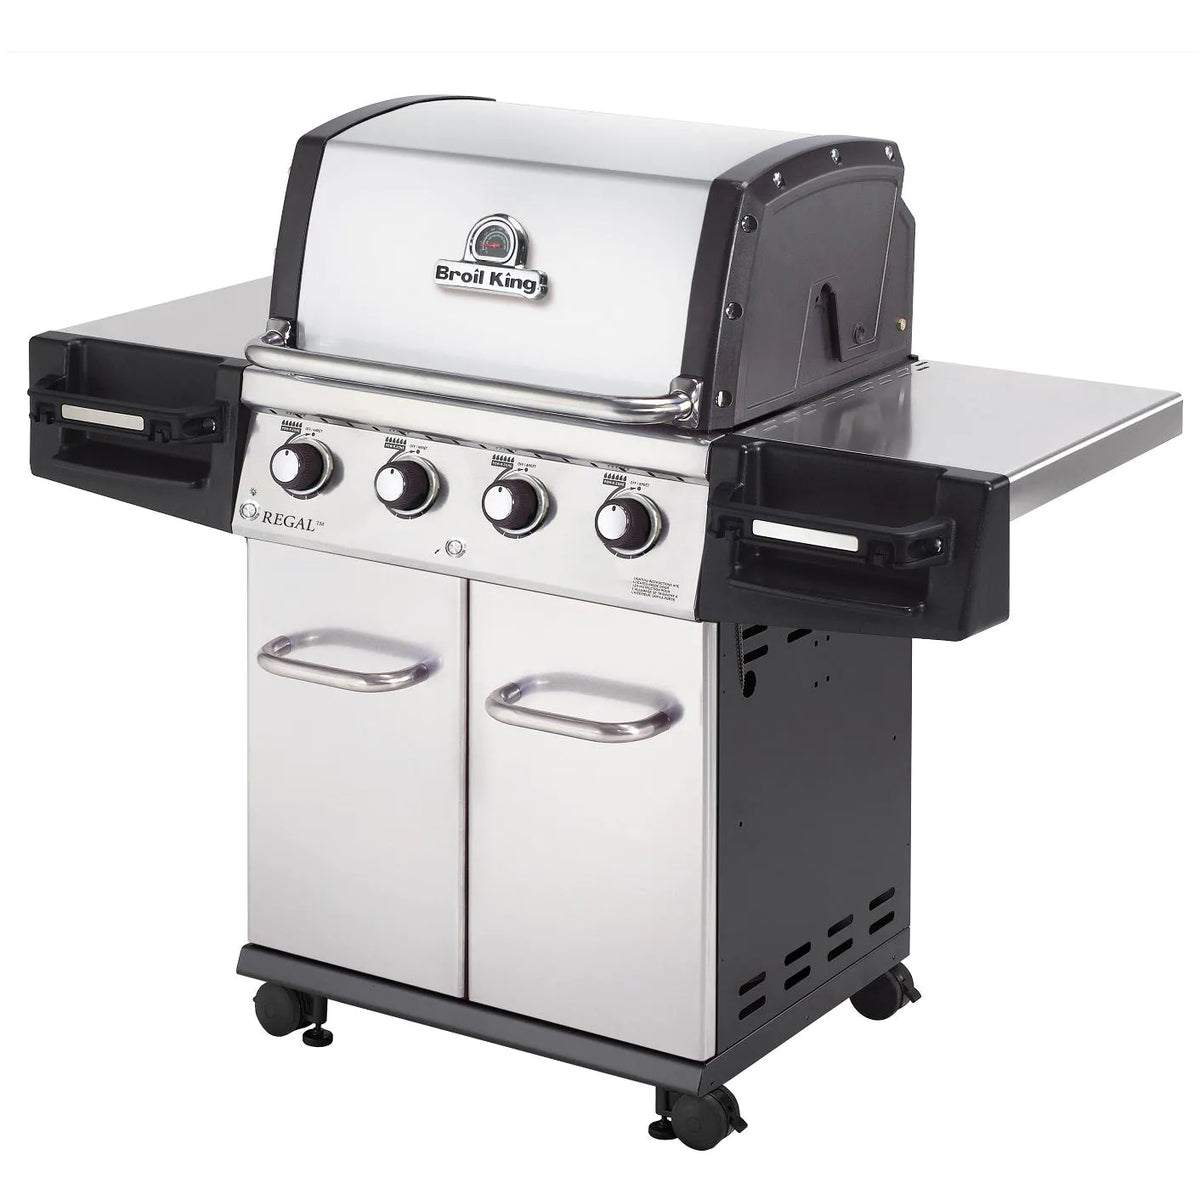 Broil King Regal S420 Pro 4-Burner Freestanding Gas Grill - Angled View